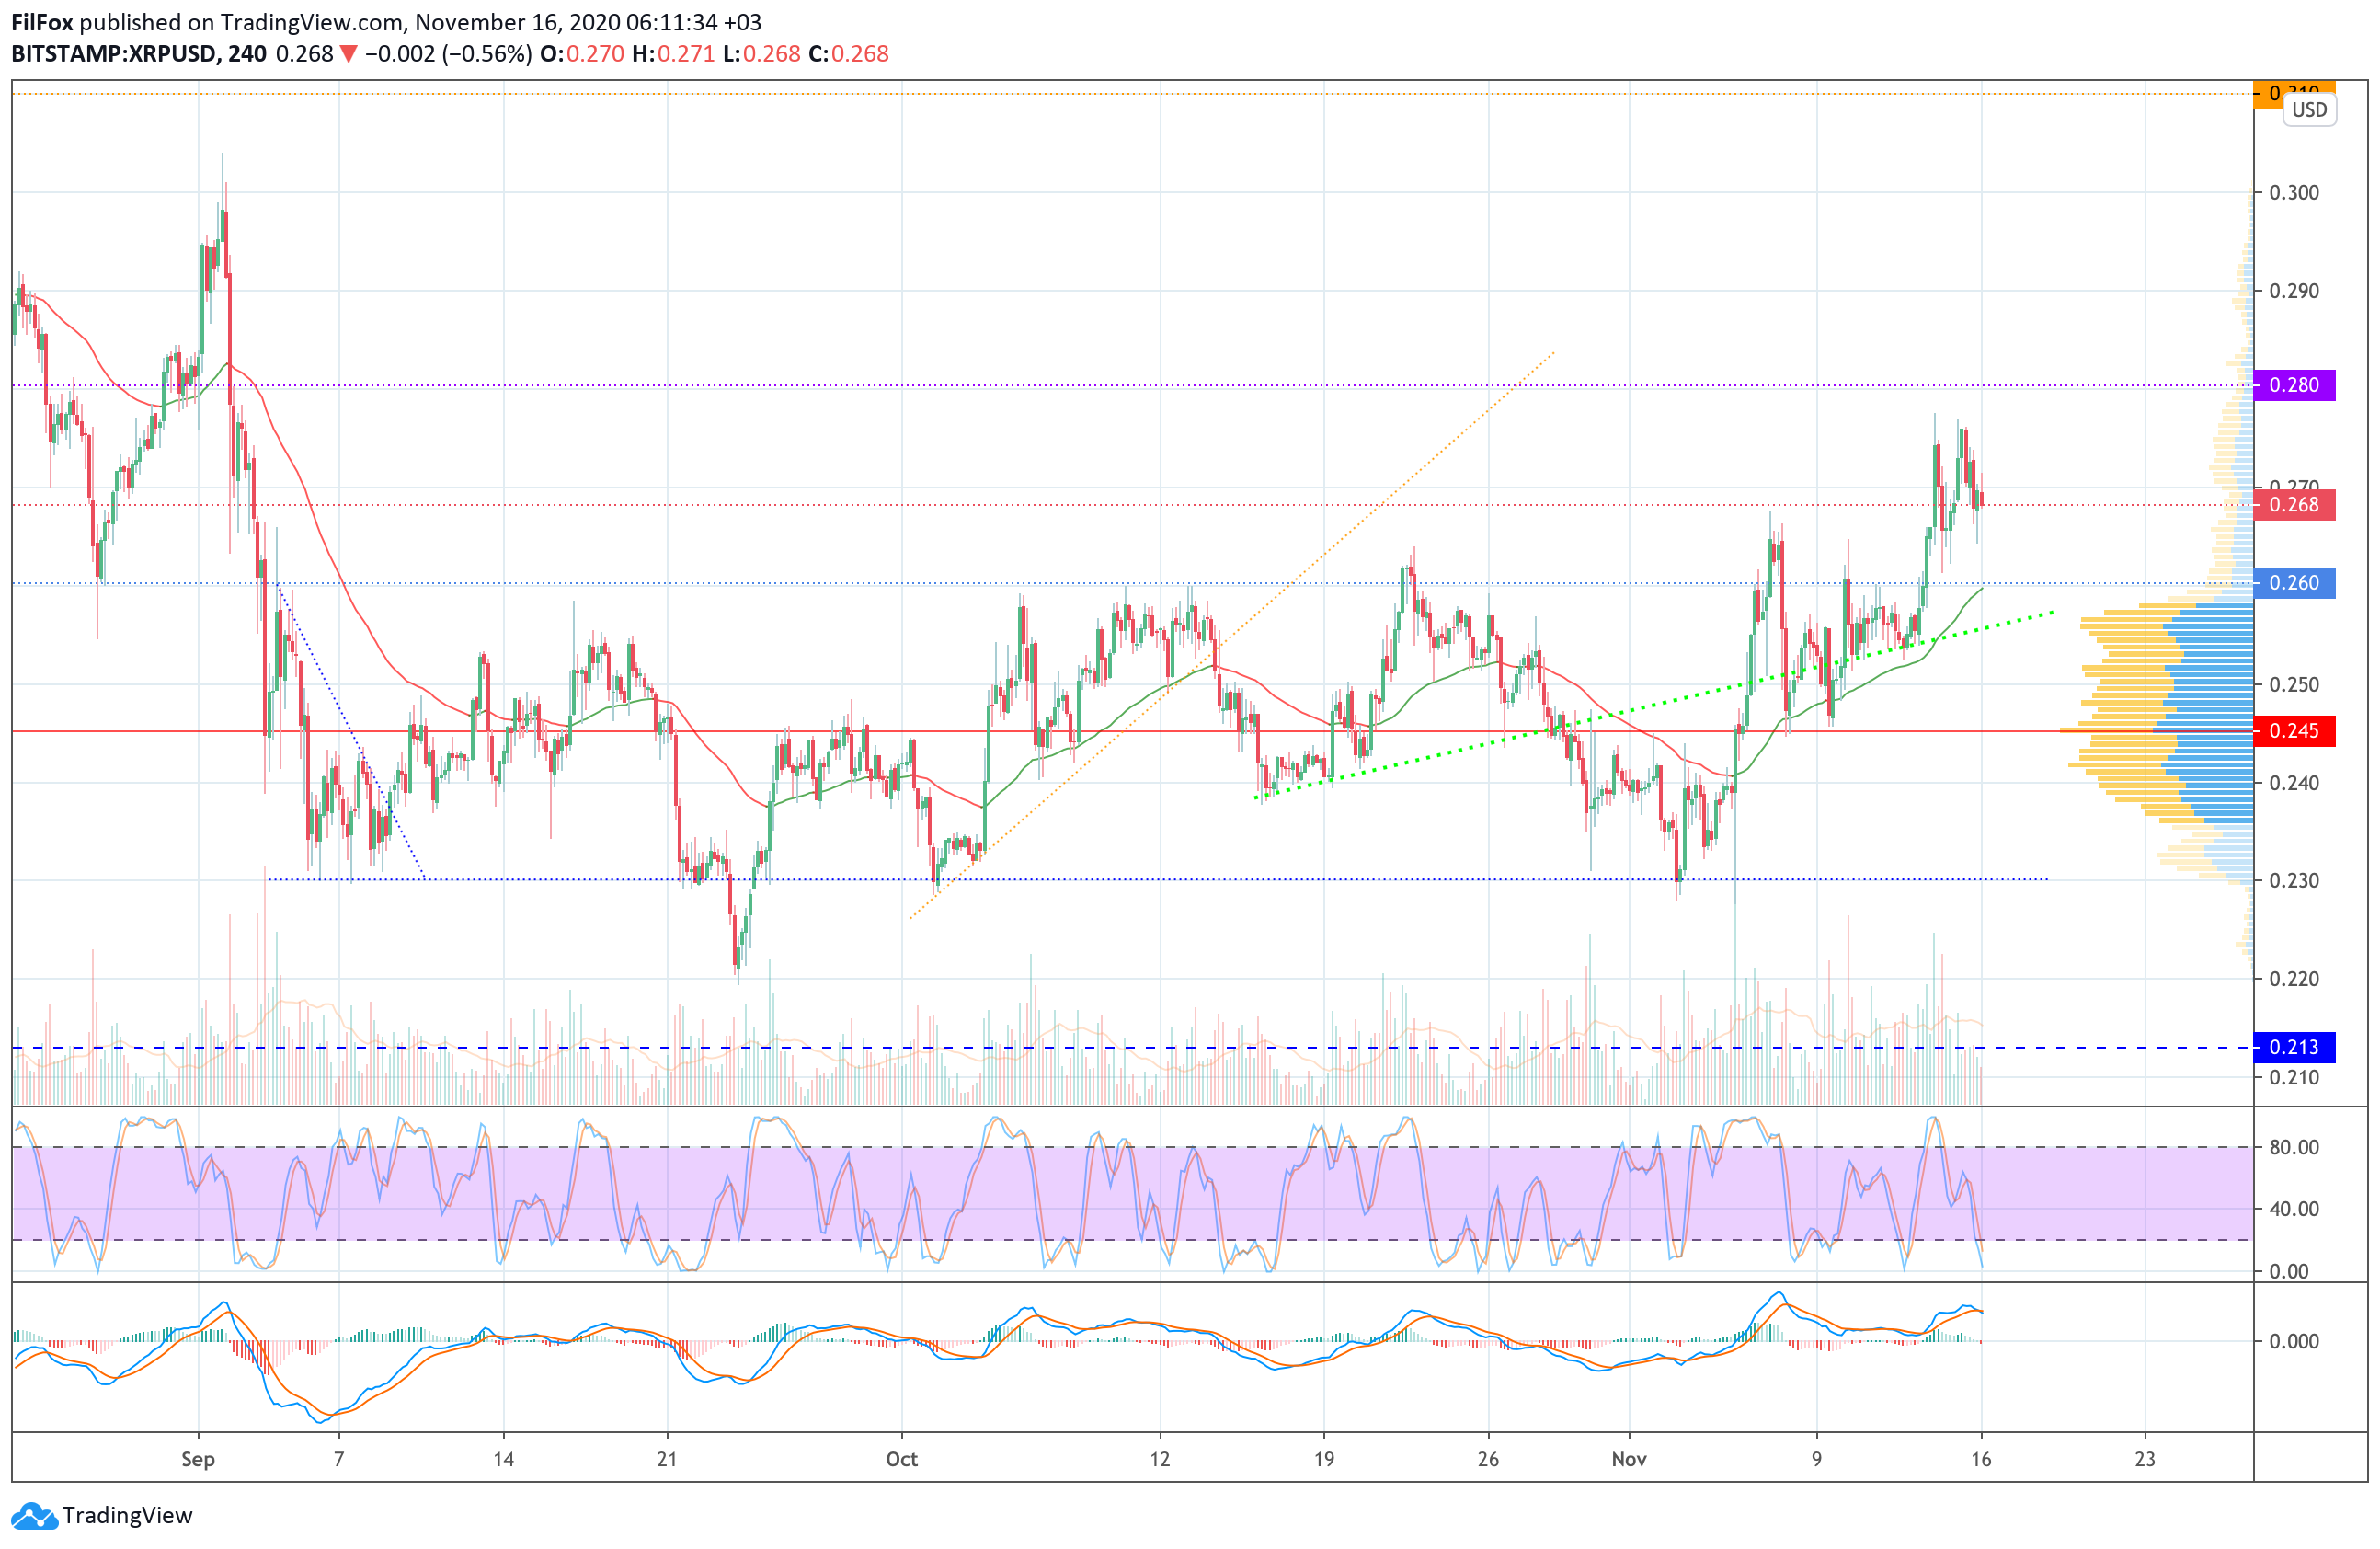 Analysis of the prices of Bitcoin, Ethereum, Ripple for 11/16/2020